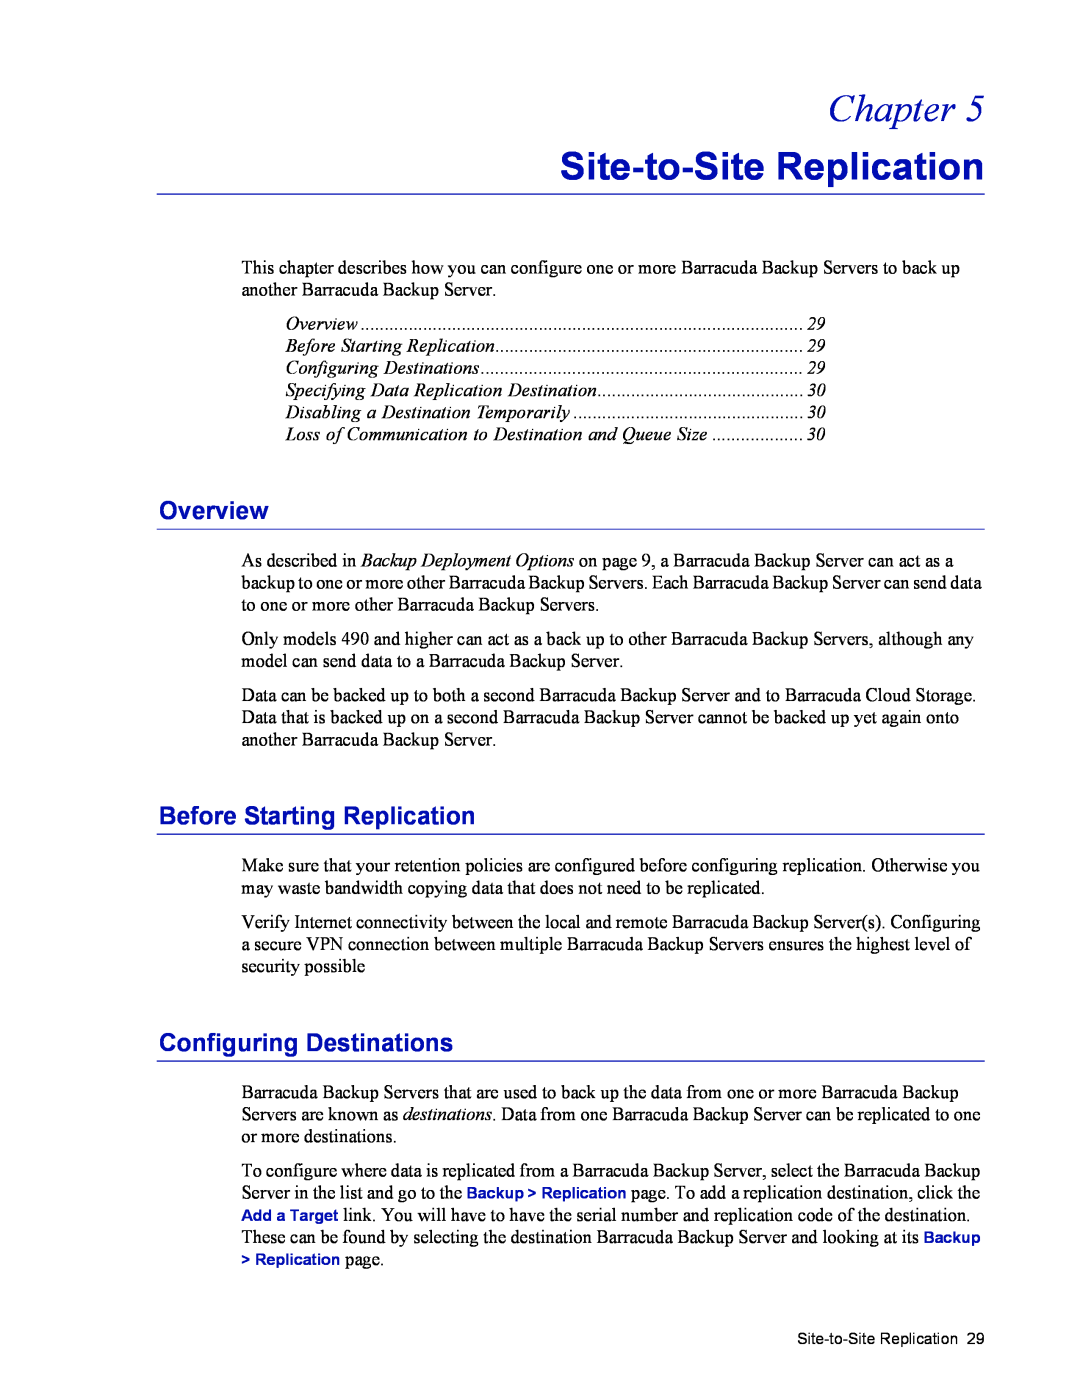 Barracuda Networks 4 Site-to-Site Replication, Overview, Before Starting Replication, Configuring Destinations, Chapter 